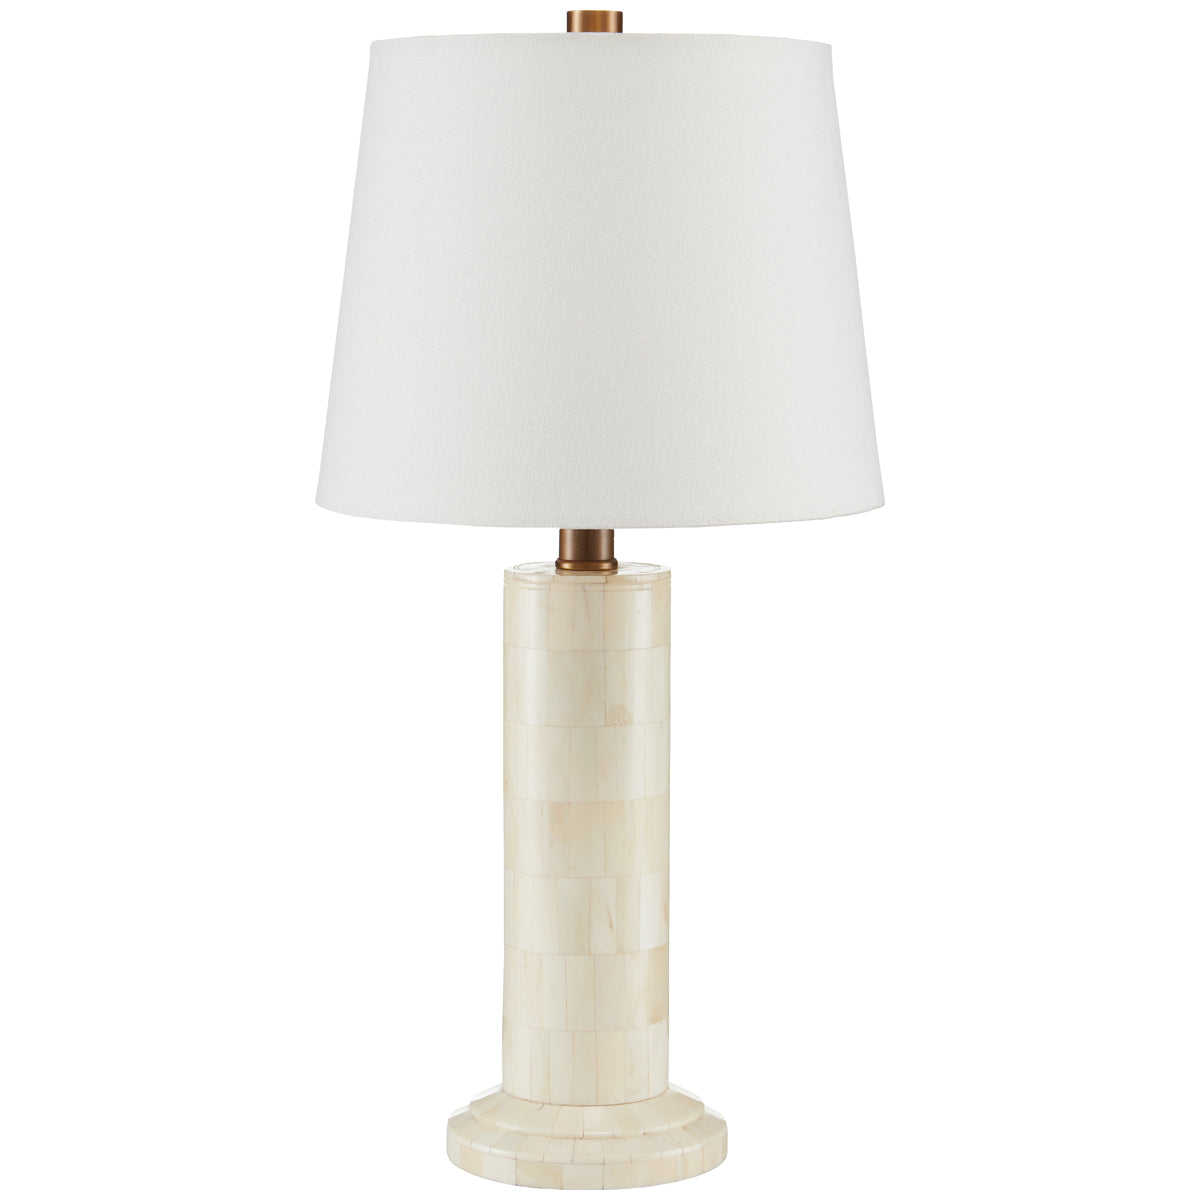 Currey and Company Osso Table Lamp